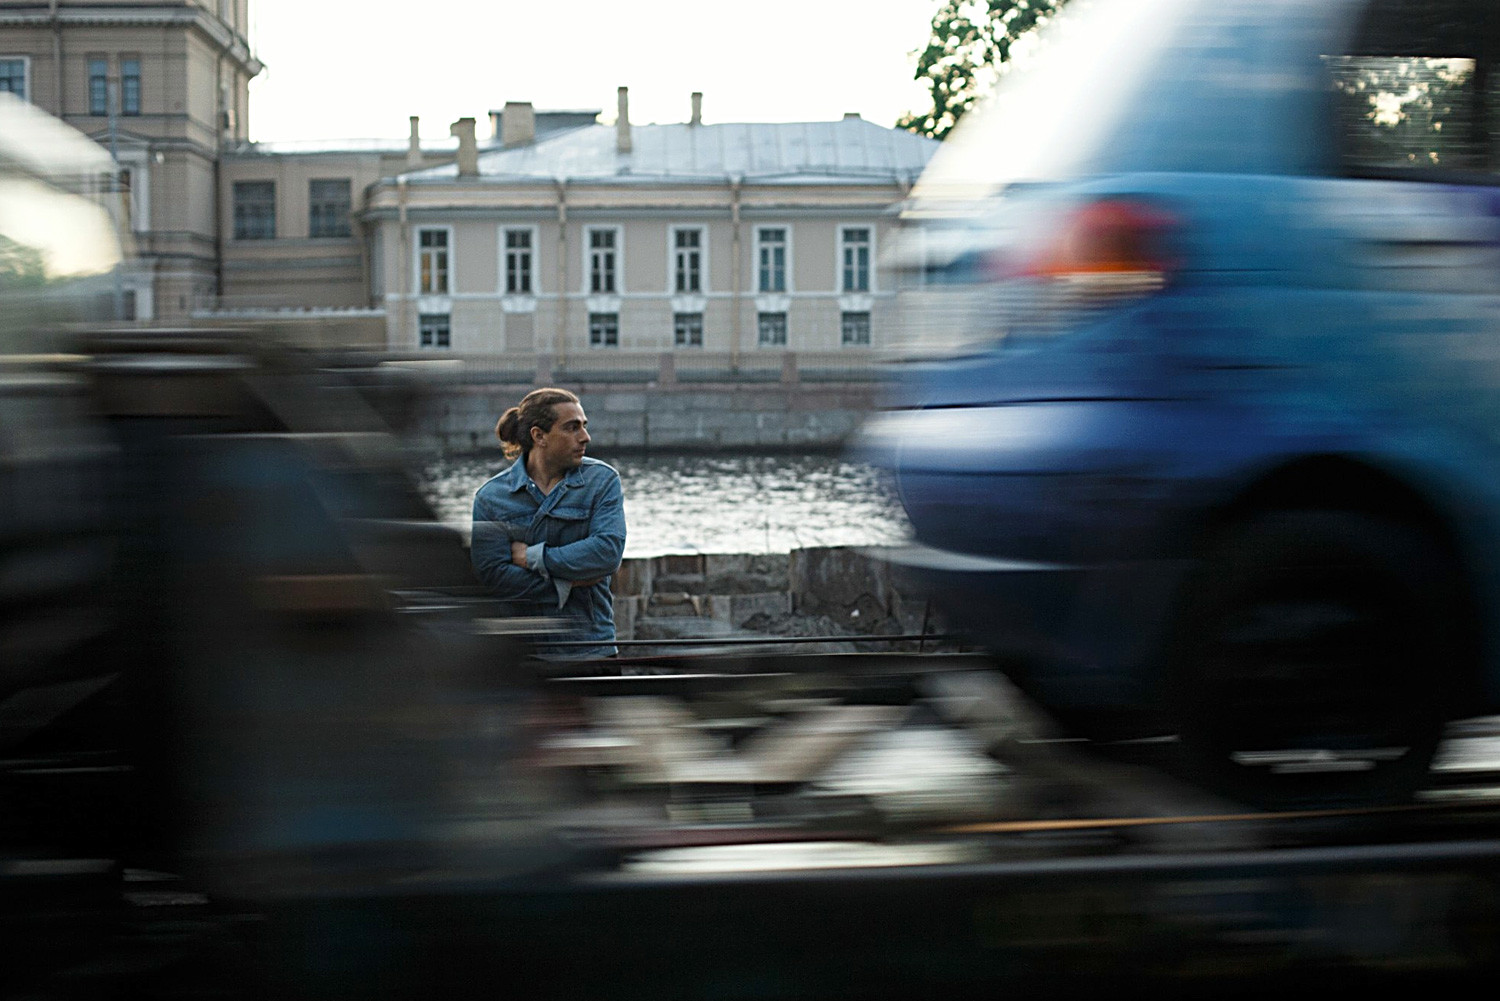 Blurred Motion Of Vehicles Against Man Standing By River Photo Taken In Saint Petersburg, Russia